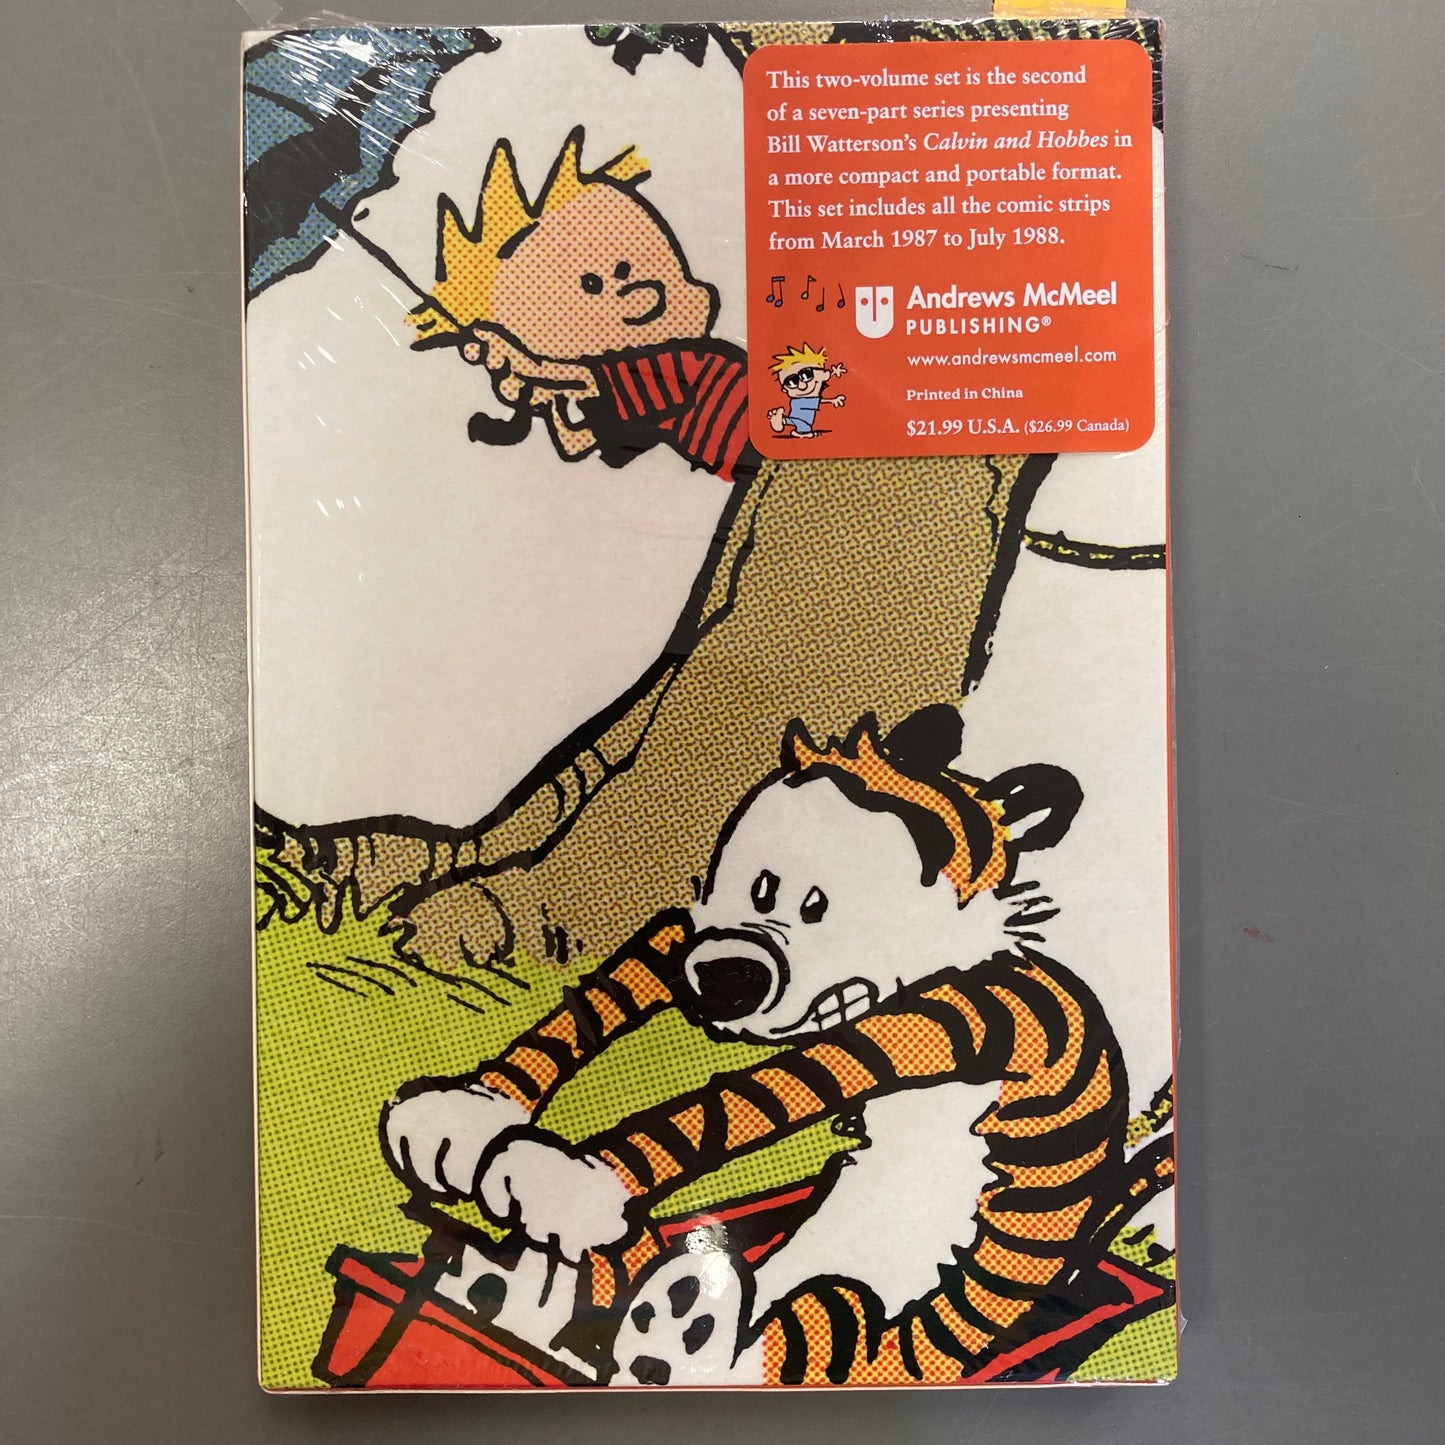 The Calvin and Hobbes Portable Compendium, Books 3+4